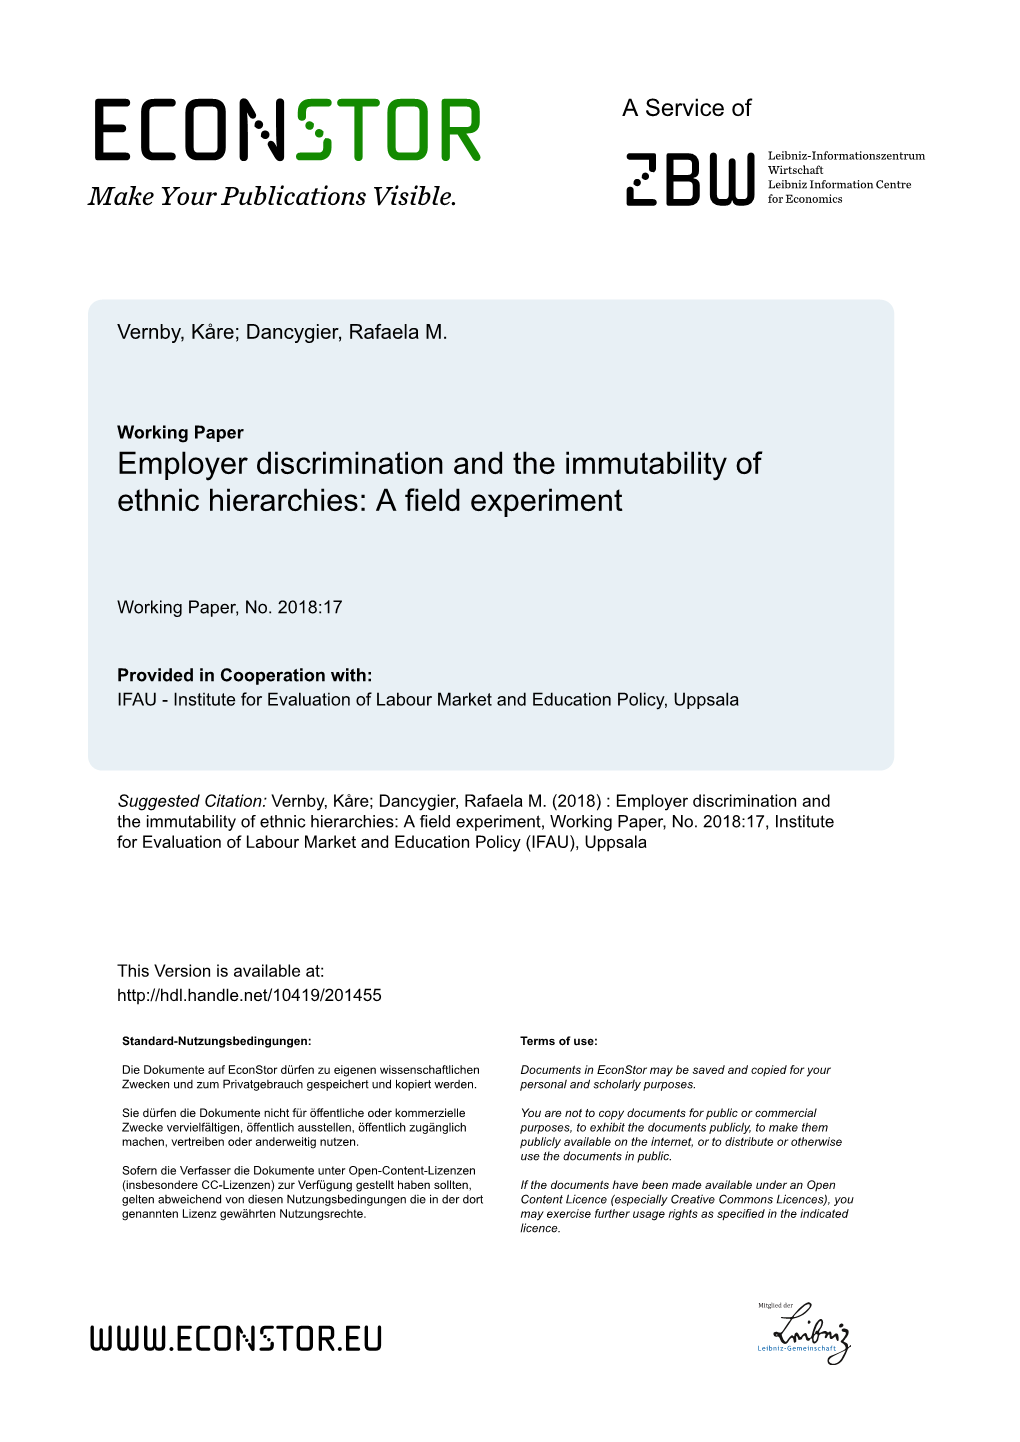 Employer Discrimination and the Immutability of Ethnic Hierarchies: a Field Experiment